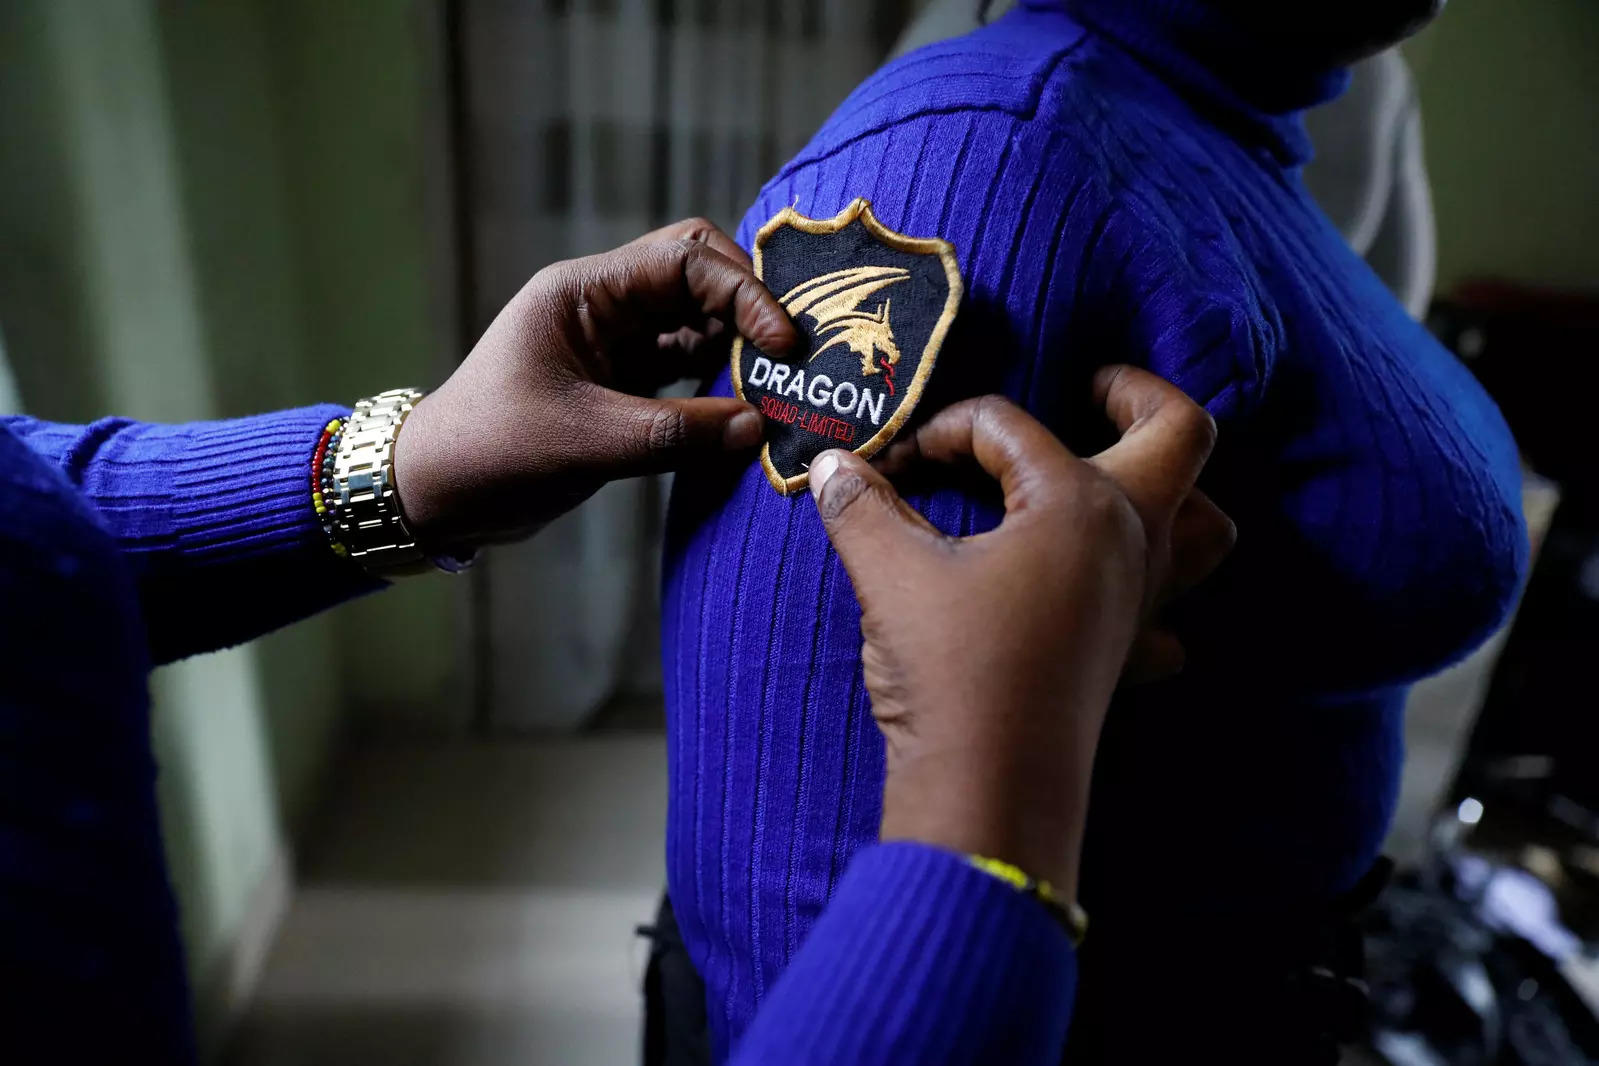 Pictures of Nigeria's female bouncers who show their strength fighting stereotypes